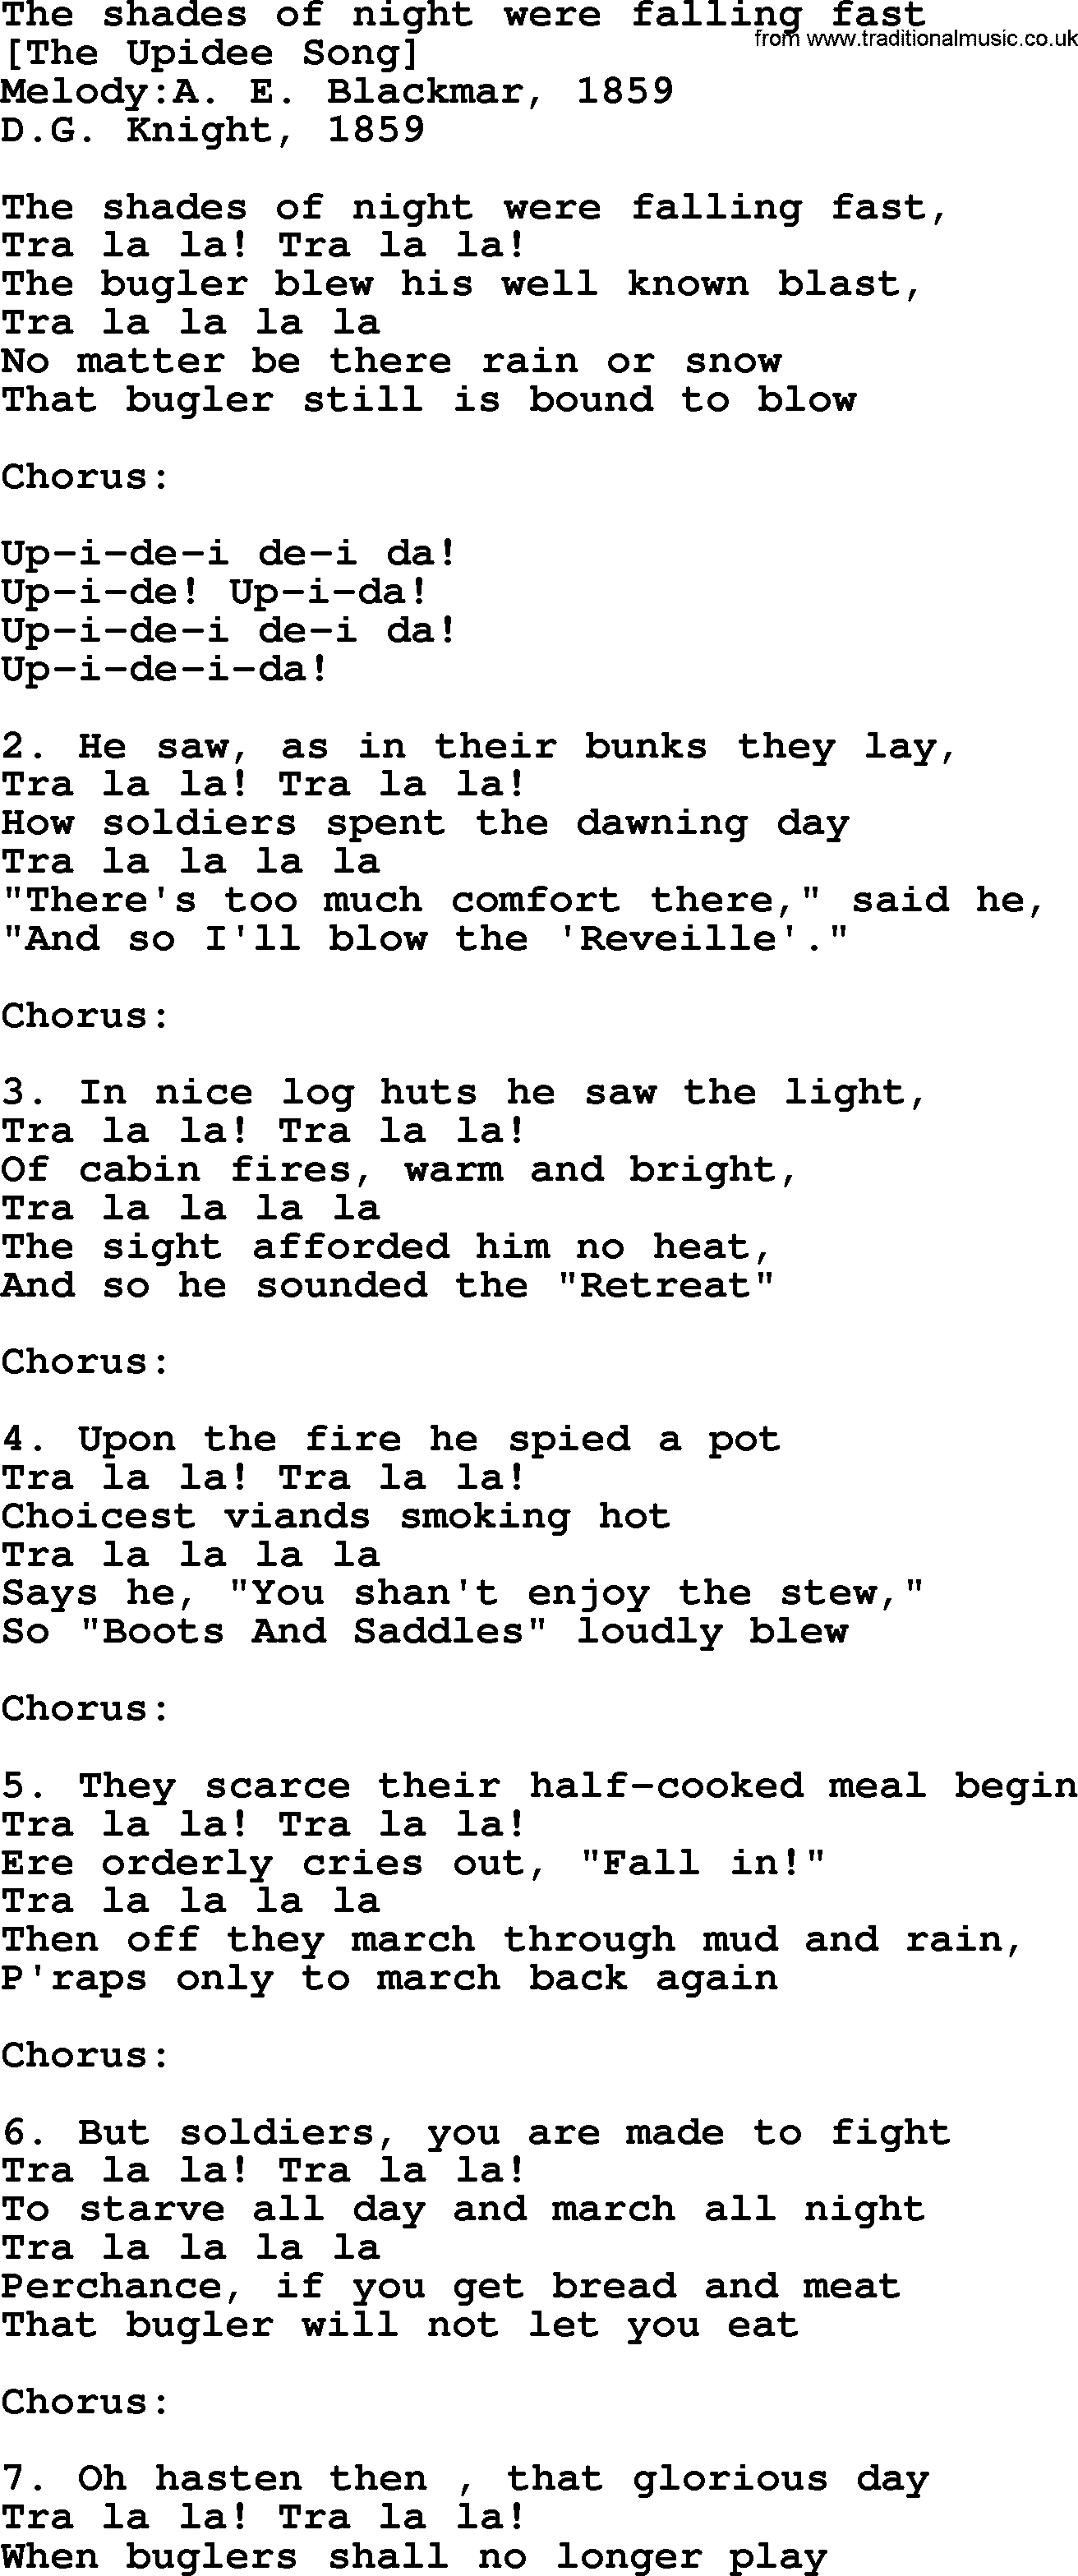 Old American Song: The Shades Of Night Were Falling Fast, lyrics